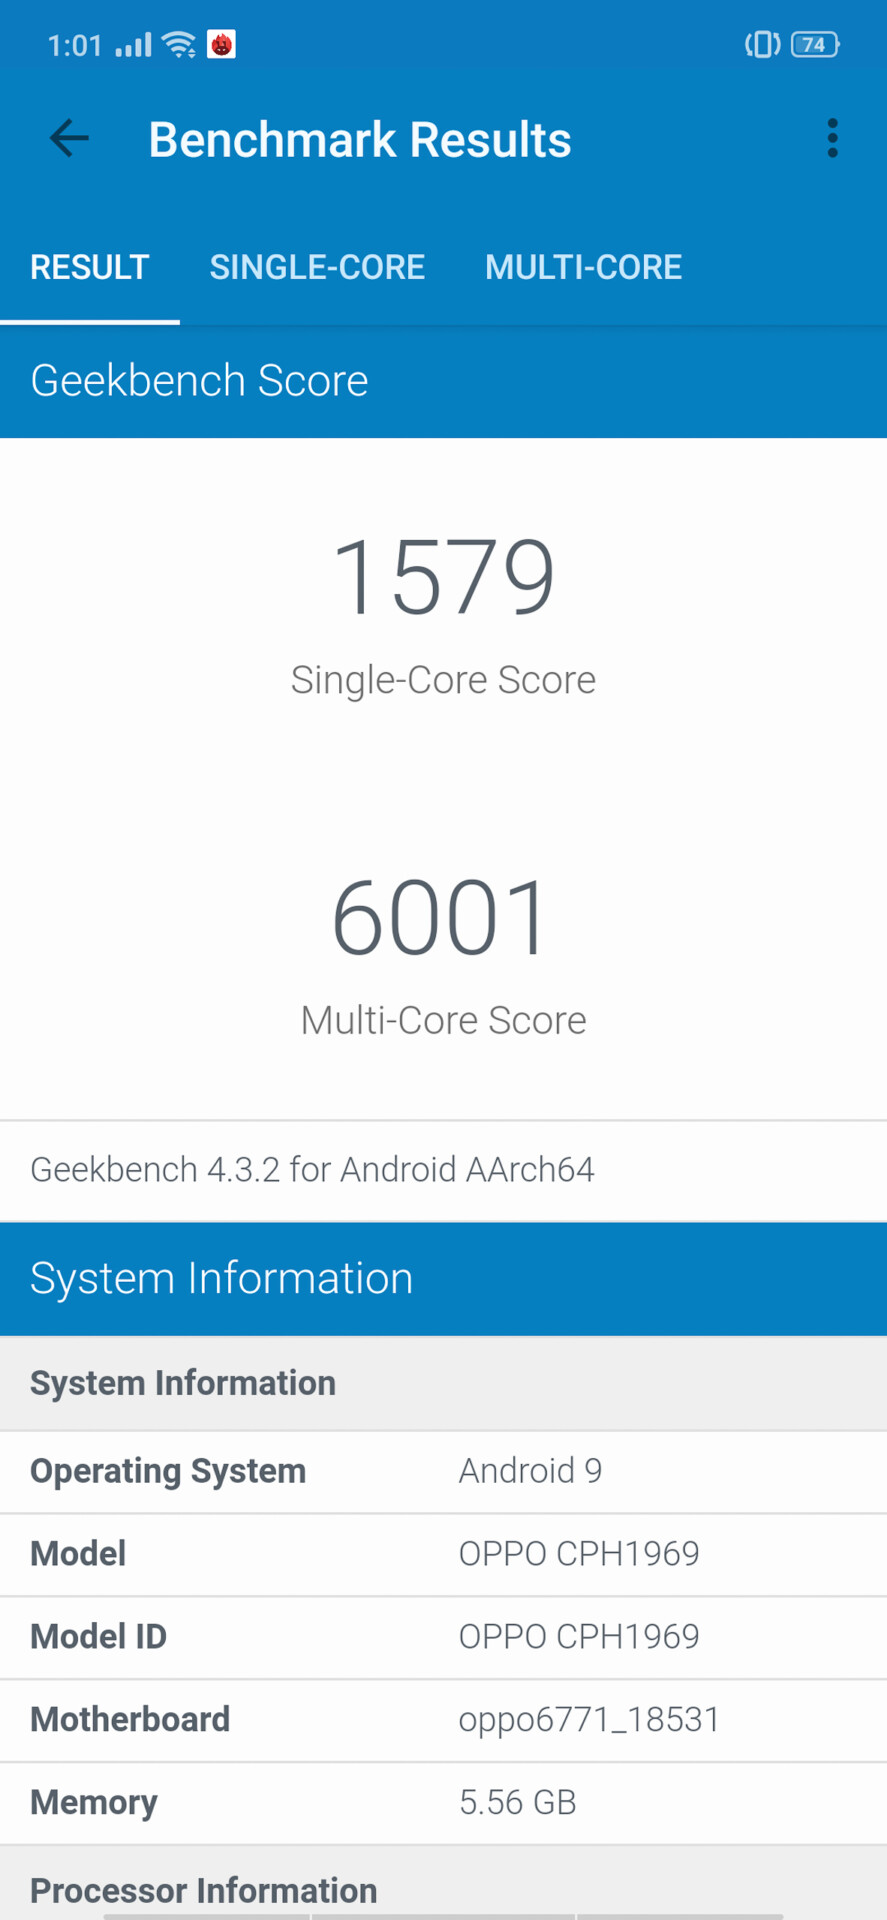 Screenshot of the Oppo F11 Pro Geekbench benchmark results